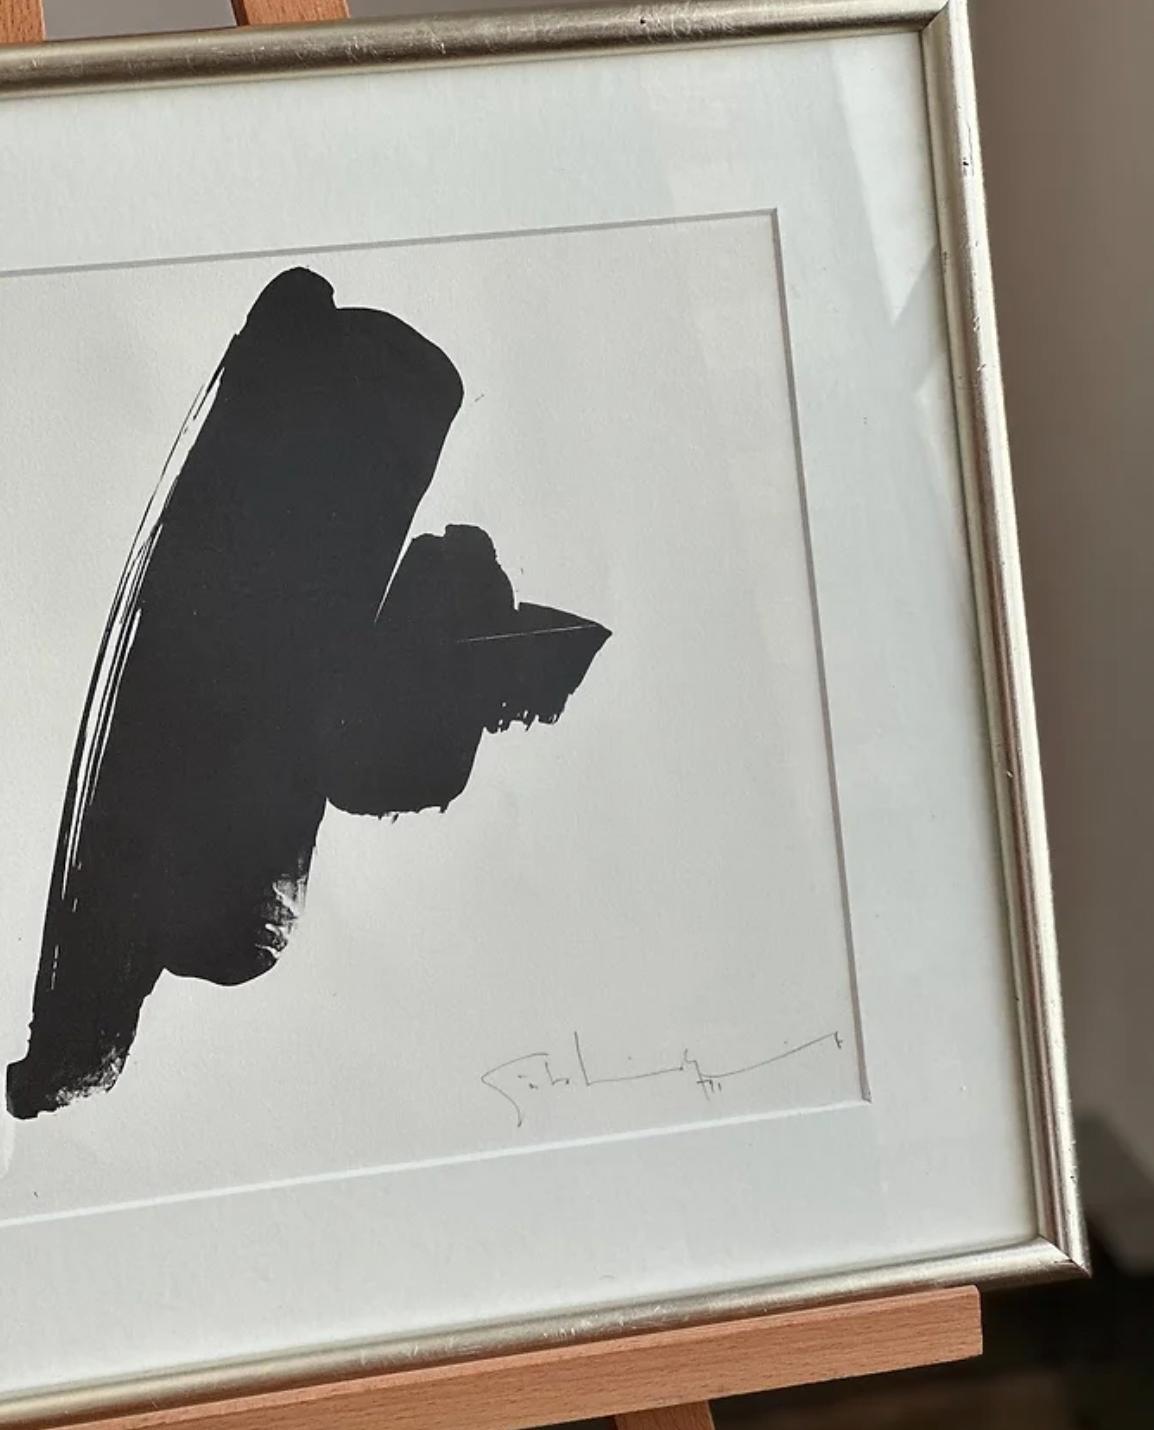 Framed Monochrome Lithograph By Gösta Lindqvist, Signed, Numbered 3/30 For Sale 2